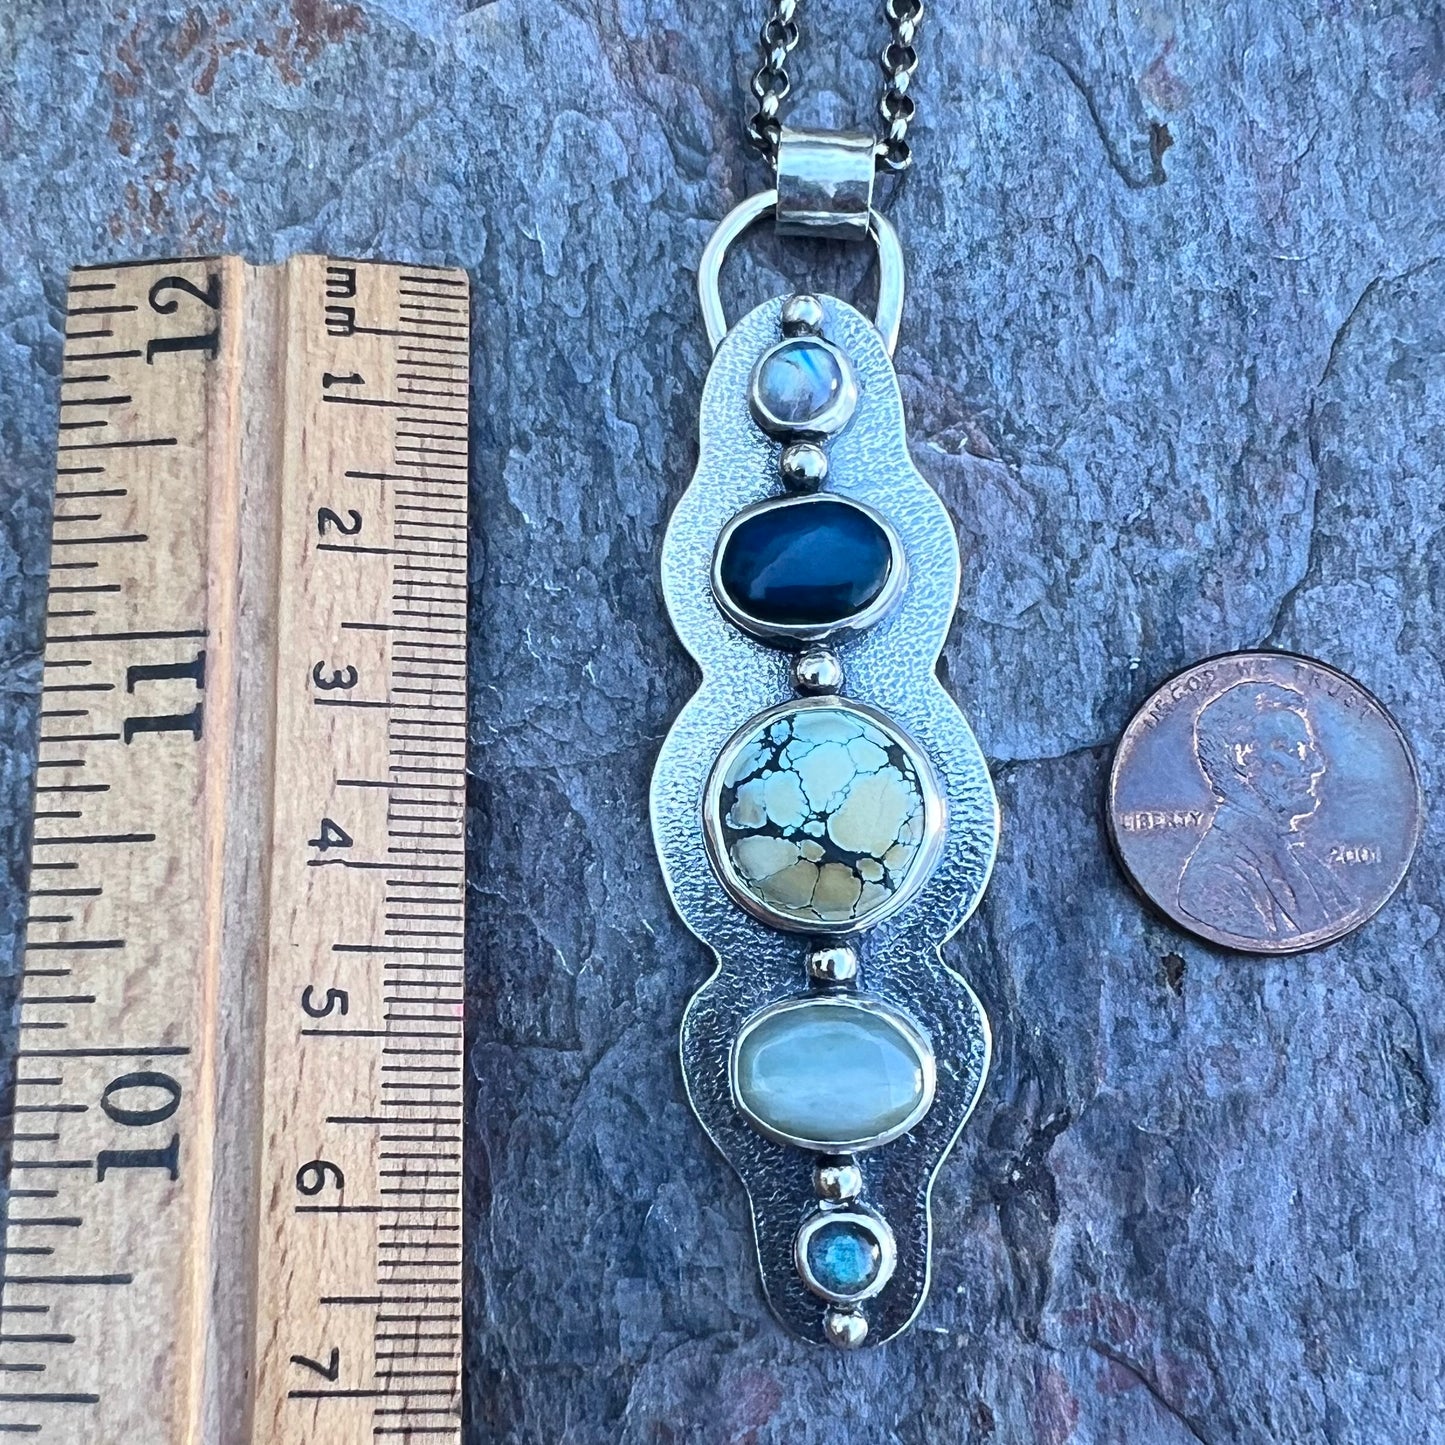 Rainbow Moonstone, Peruvian Opal, Turquoise, and Labradorite Sterling Silver Handmade One-of-a-kind Pendant Necklace